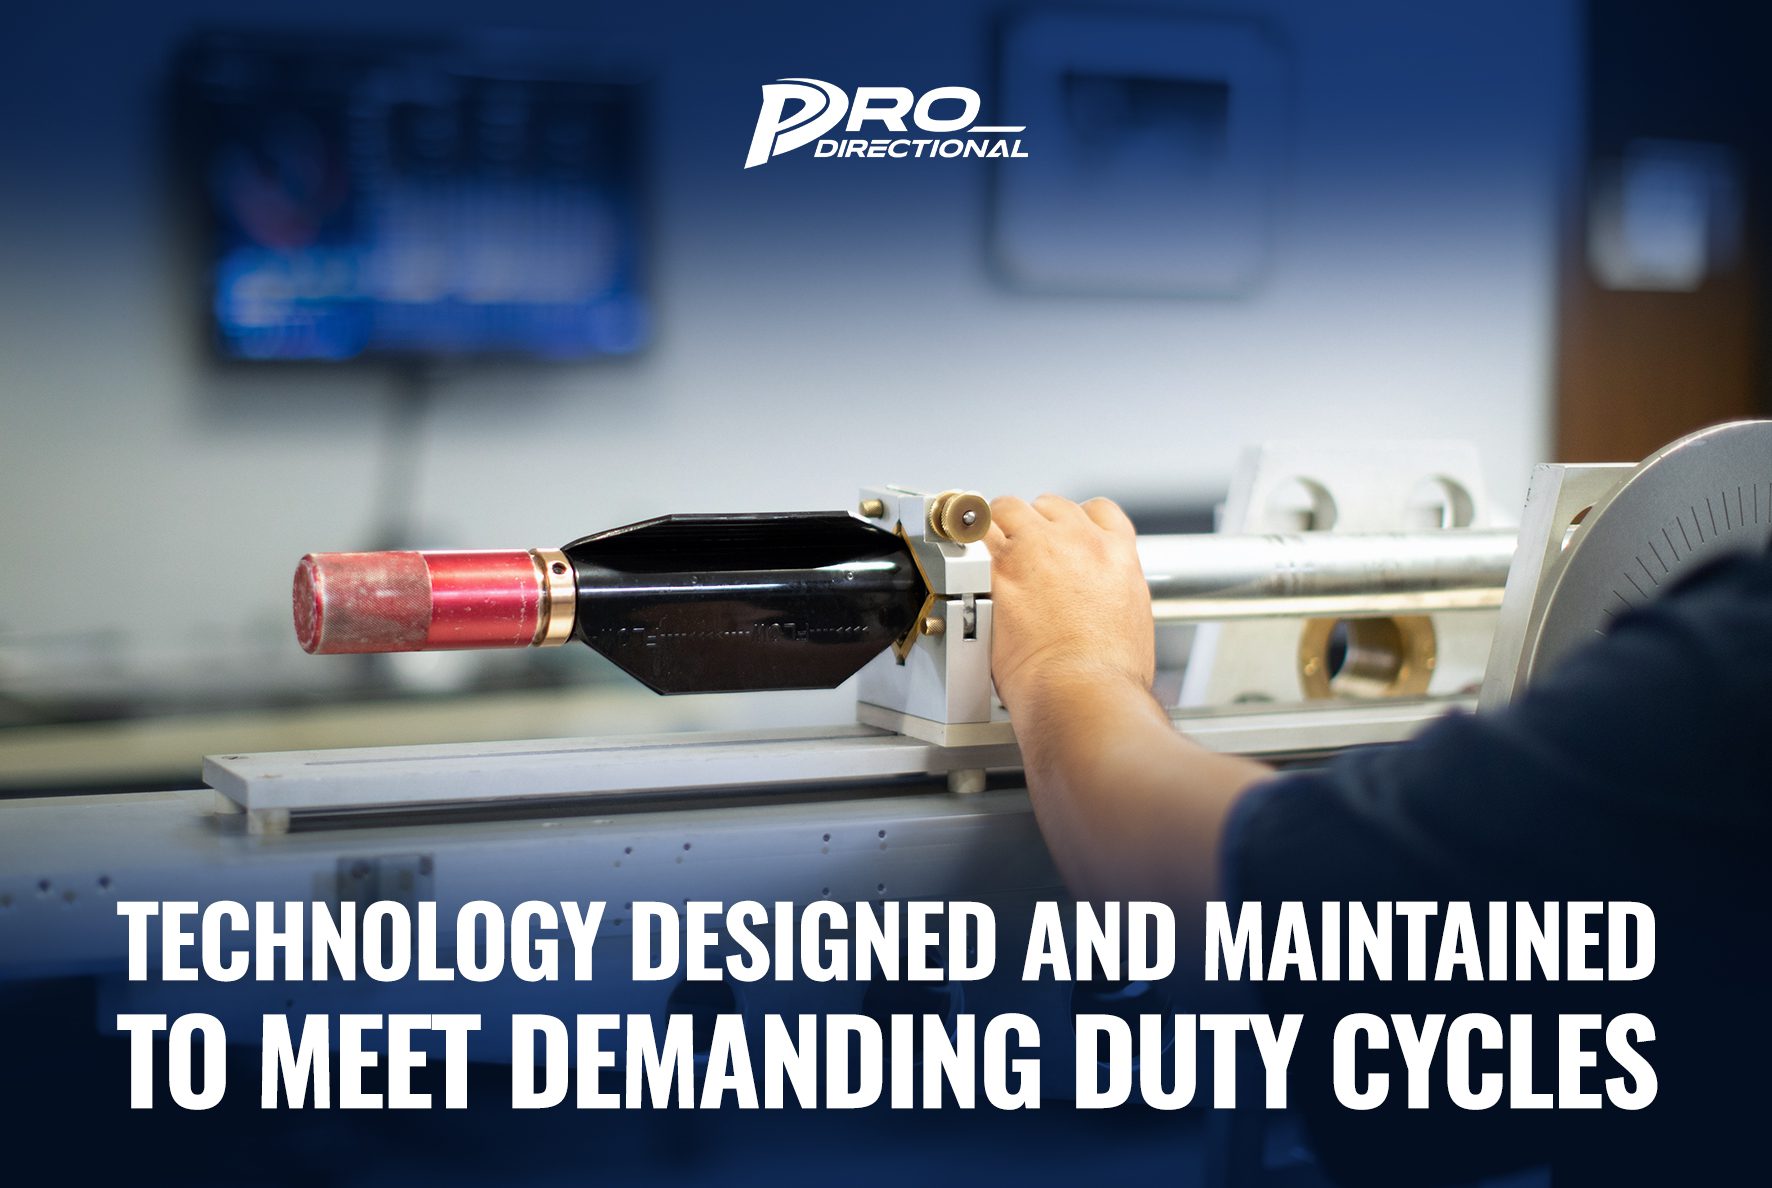 Featured Image for “Technology designed and maintained to meet demanding duty cycles”